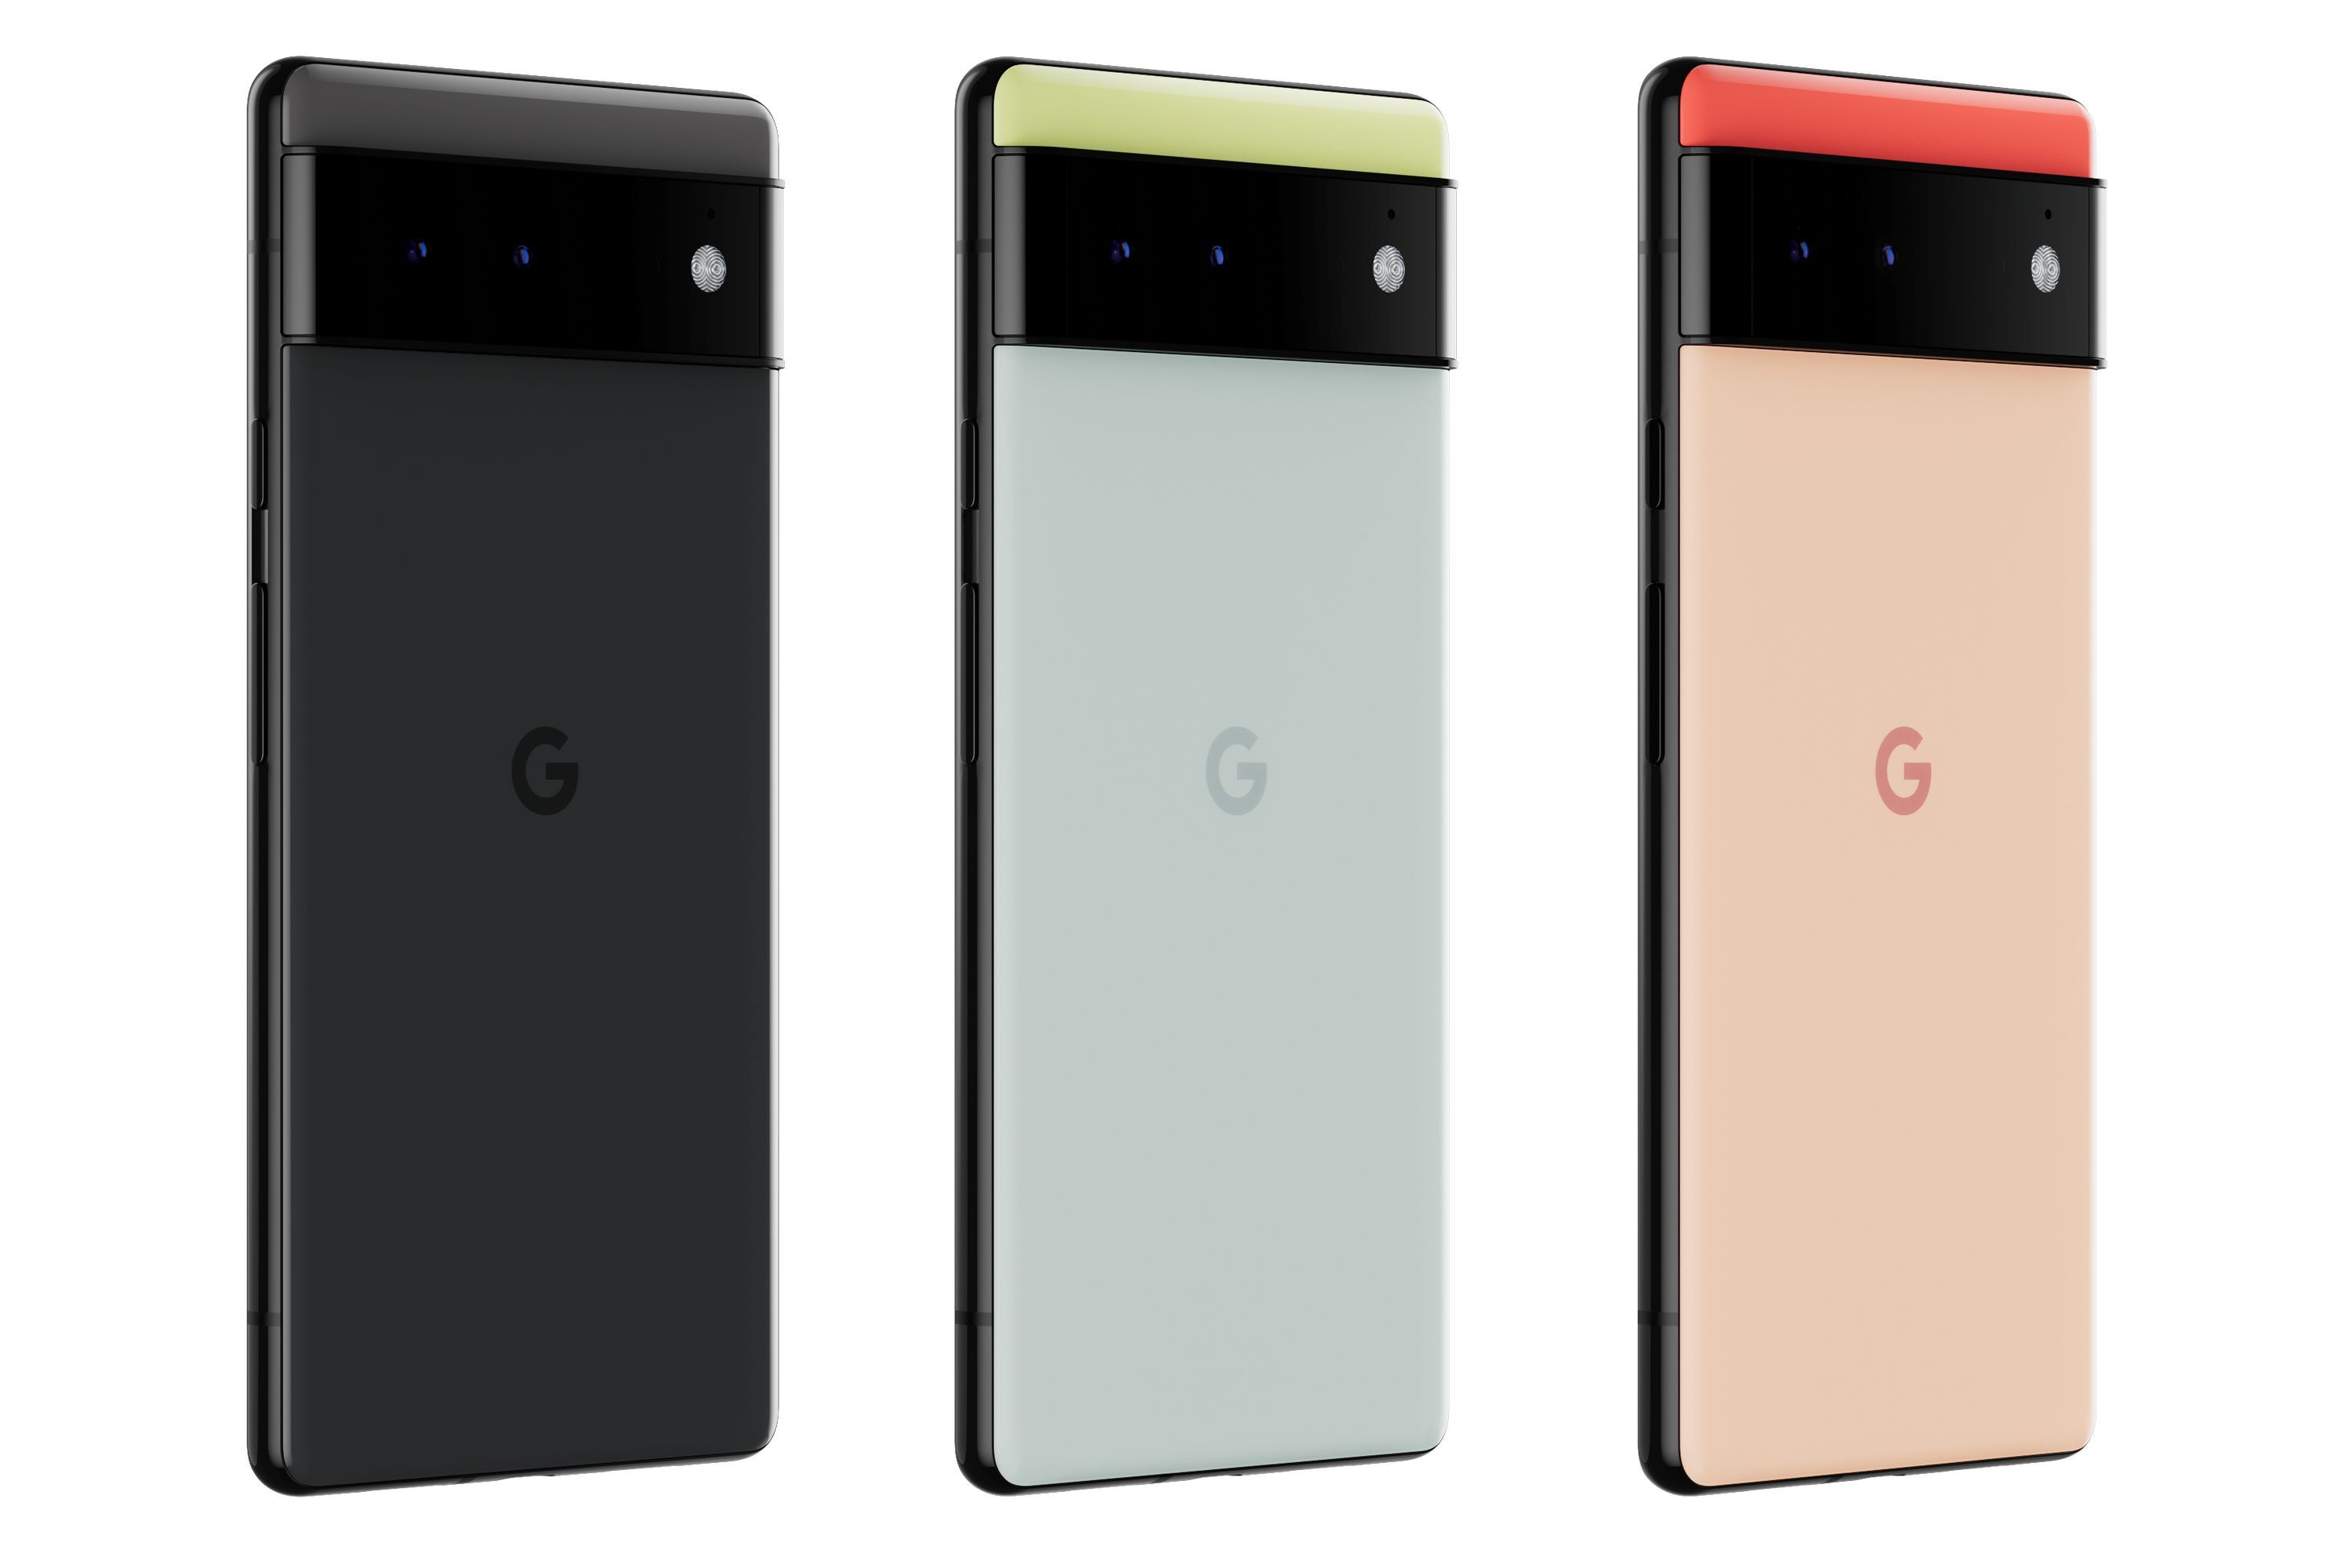 The Google Pixel 6 in all its colors - Pixel 6 and Pixel 6 Pro price: trade-in and carrier deals are here